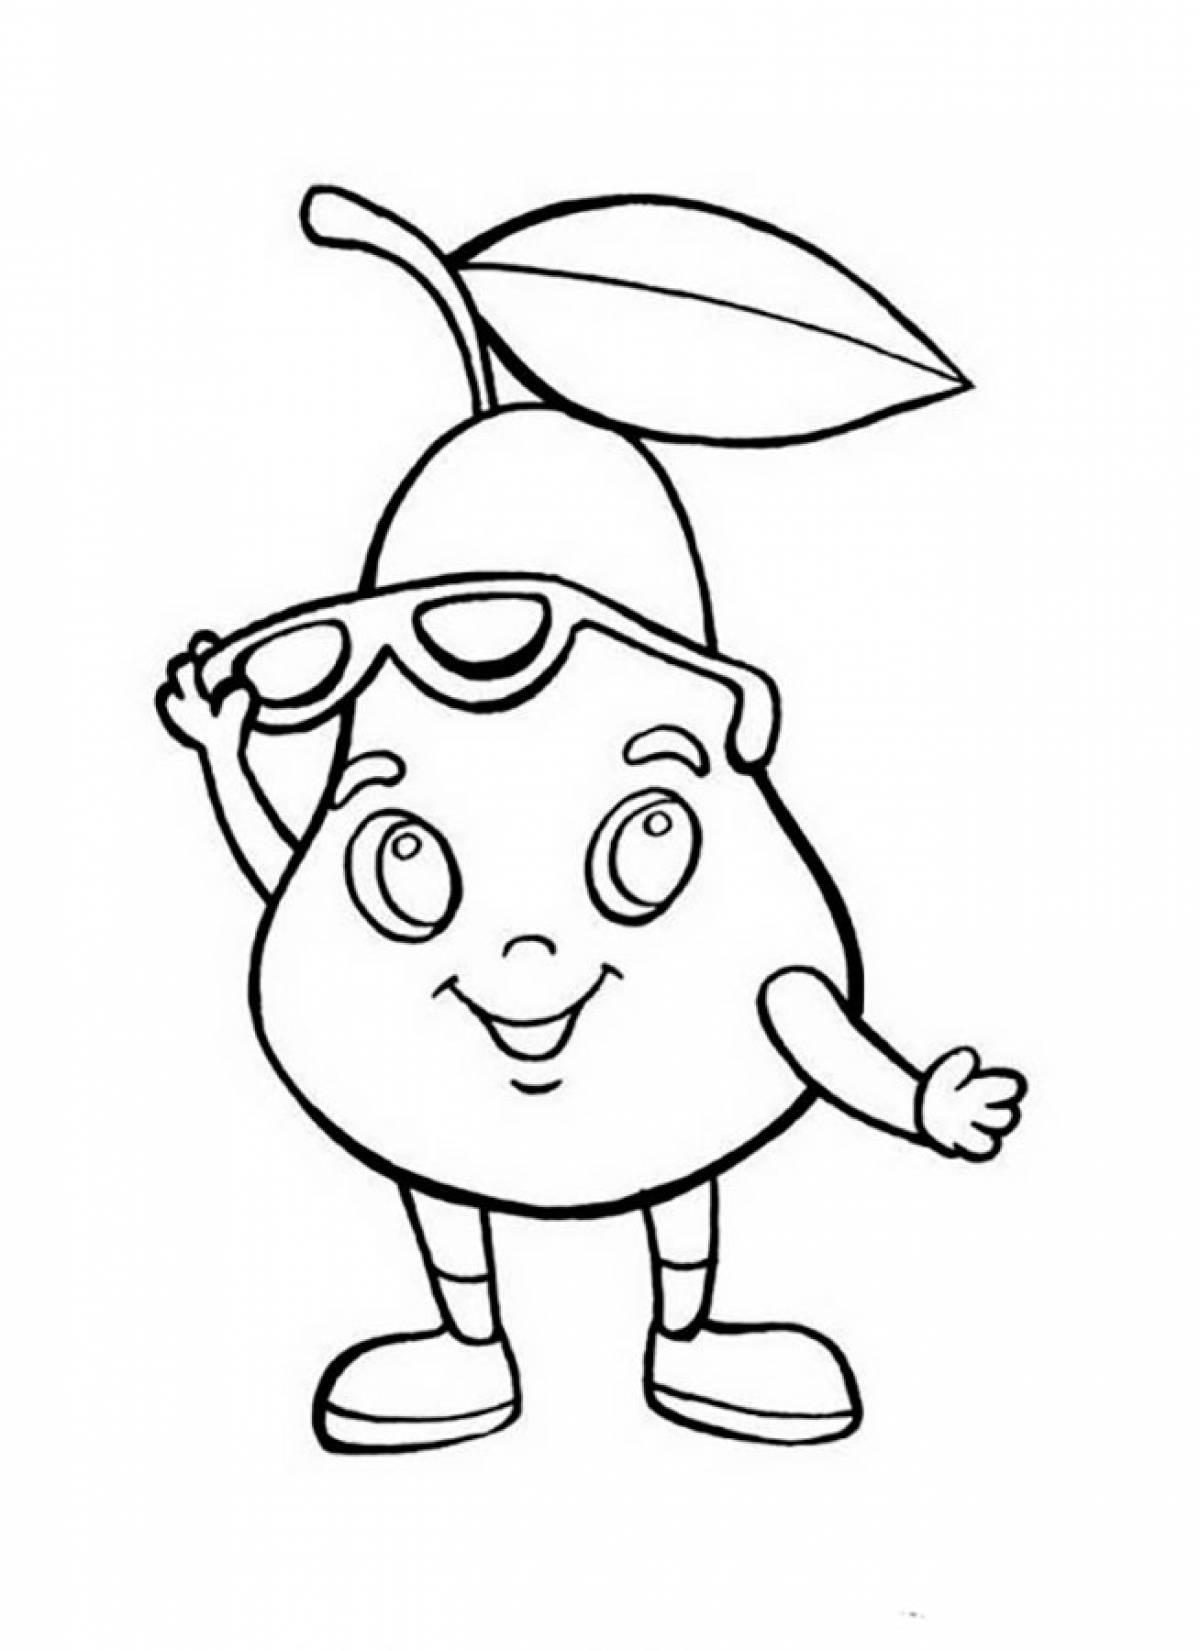 Pear with glasses